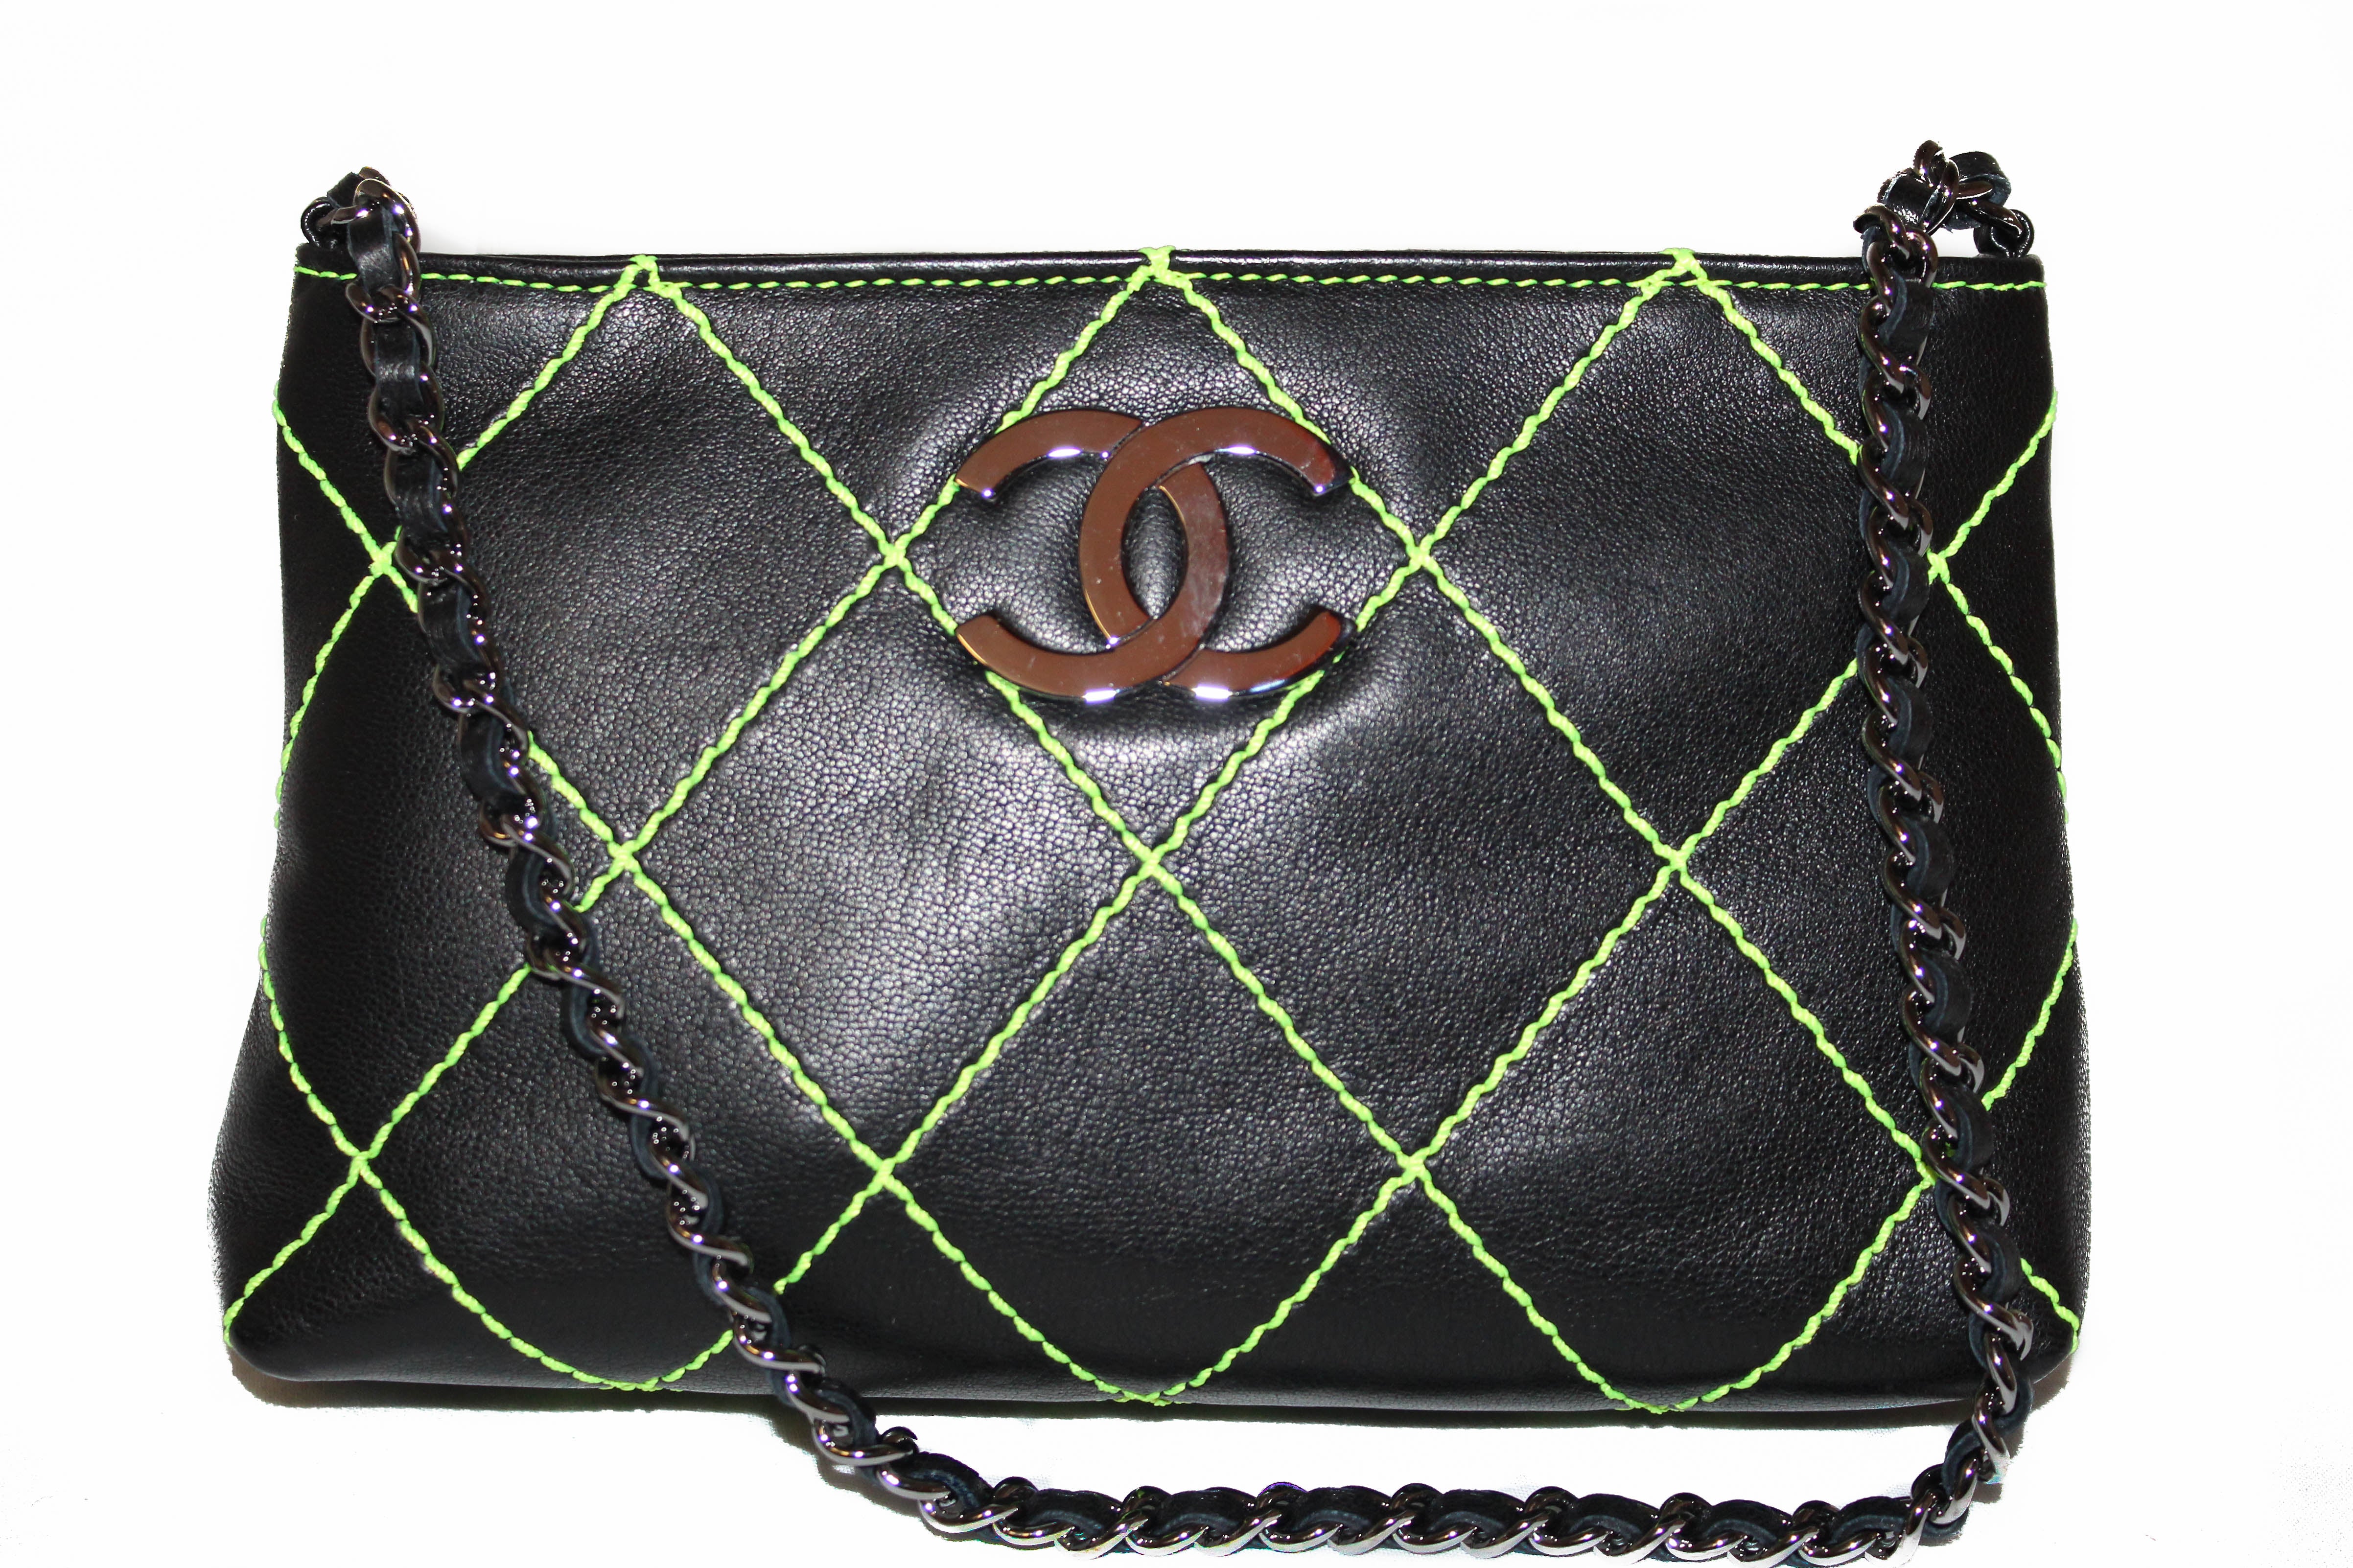 Authentic New Chanel Black Quilted Leather Wide Stitch Small Pouch Chain Bag